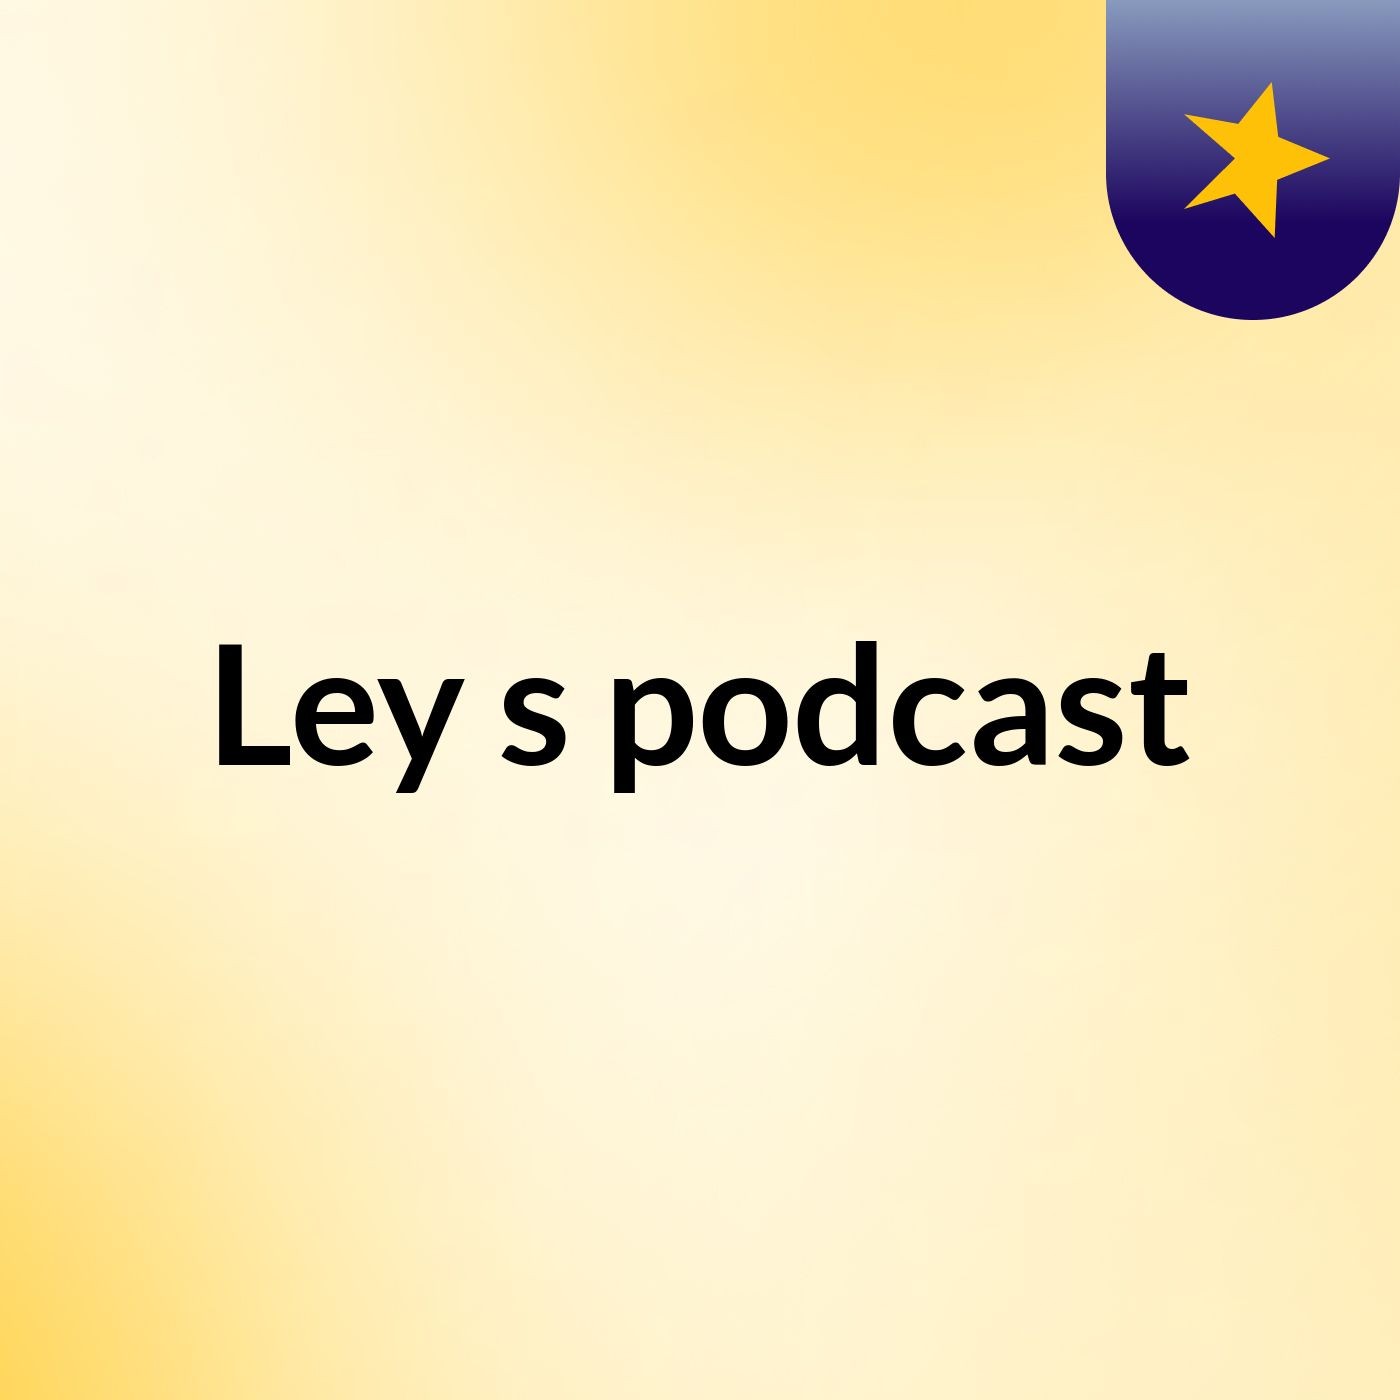 Episode 3 - Ley's podcast